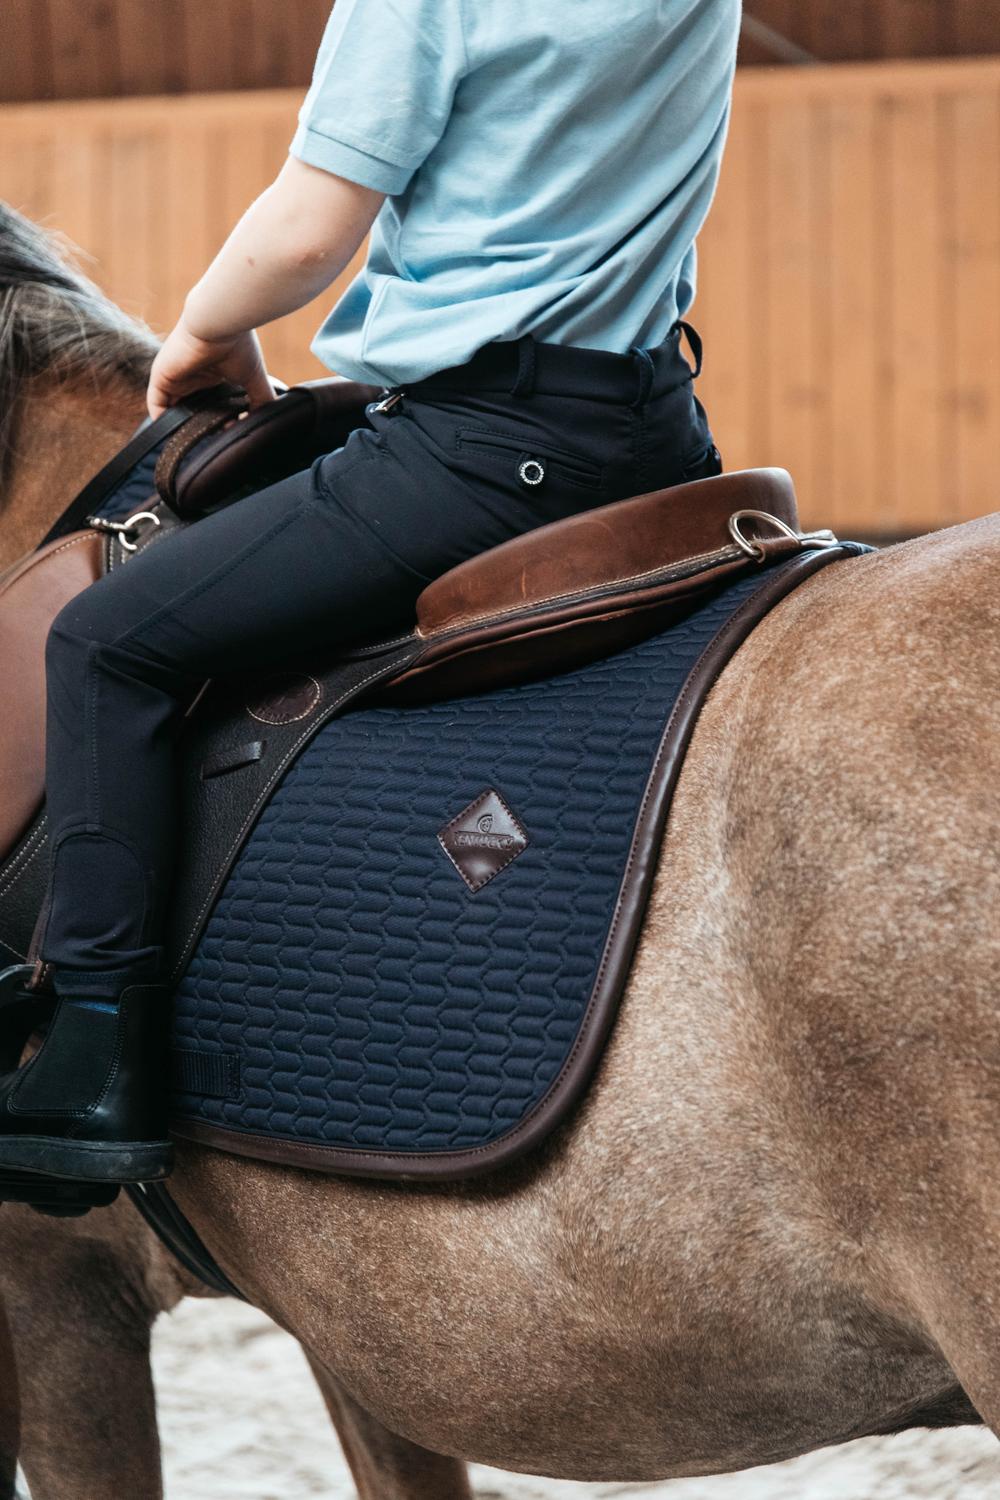 Saddle Pad Color Edition Leather Jumping